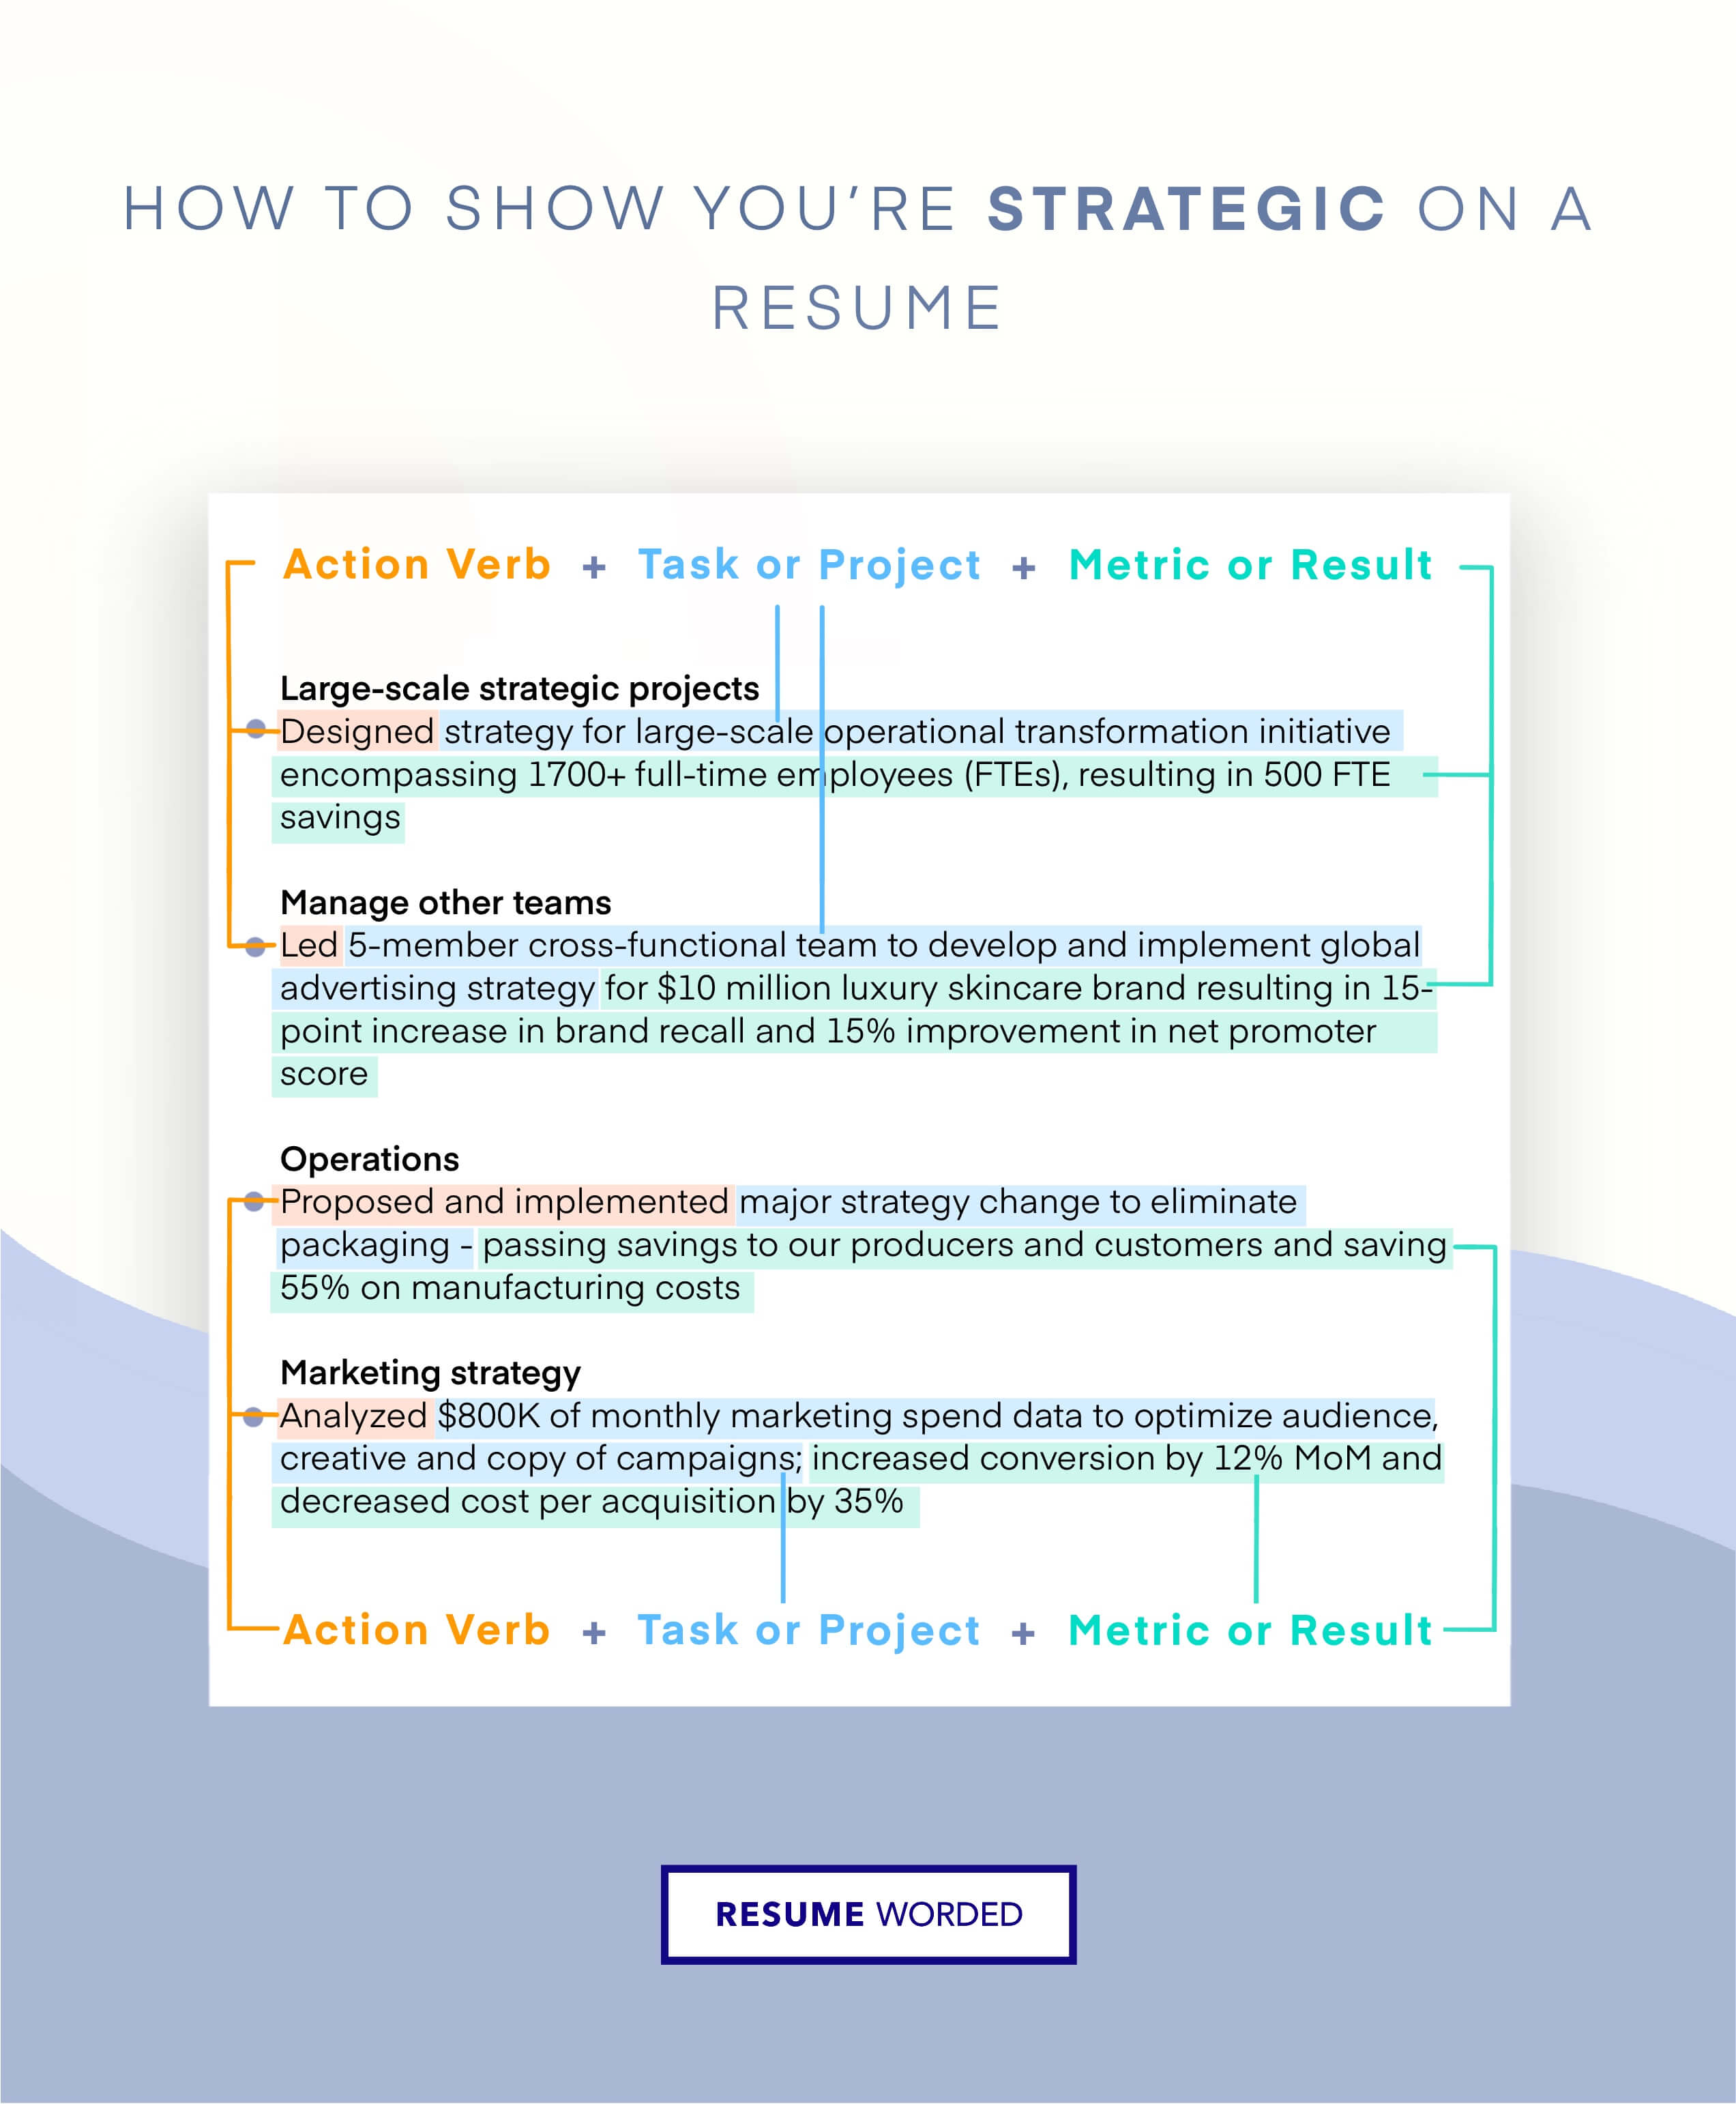 Showcase your strategic thinking - Operational Excellence Manager CV